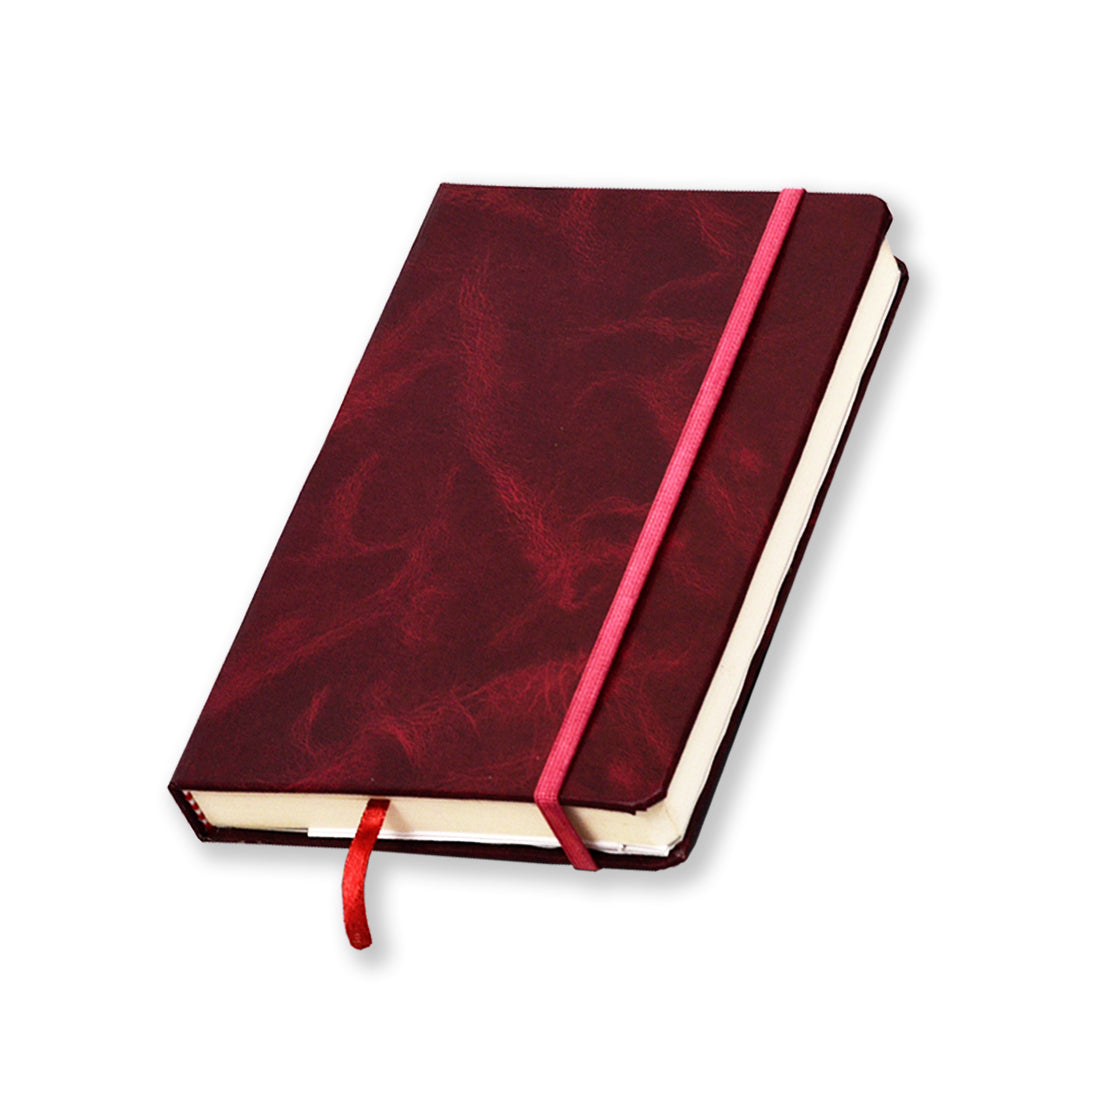 Red Journal 240 Pages, Hardcover, Un- Ruled Pages, 5.5x 8.25-Inch for Men & Women…